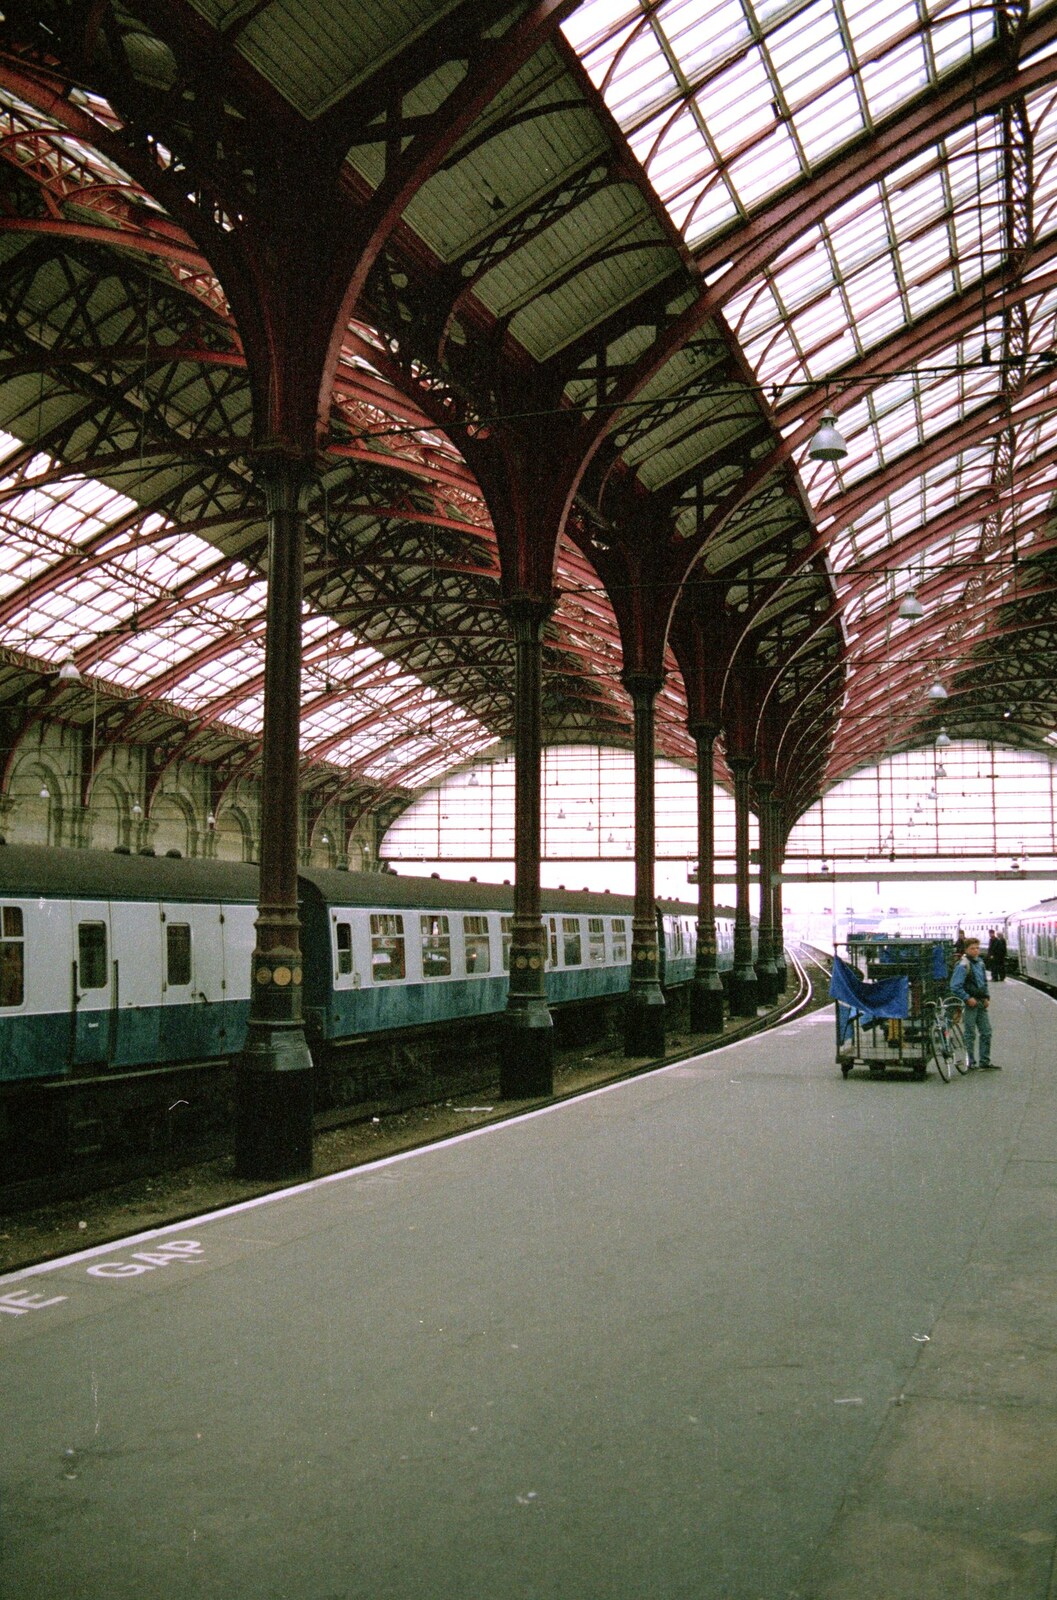 Brighton railway station from Network Day with Hamish, The South East - 21st June 1986